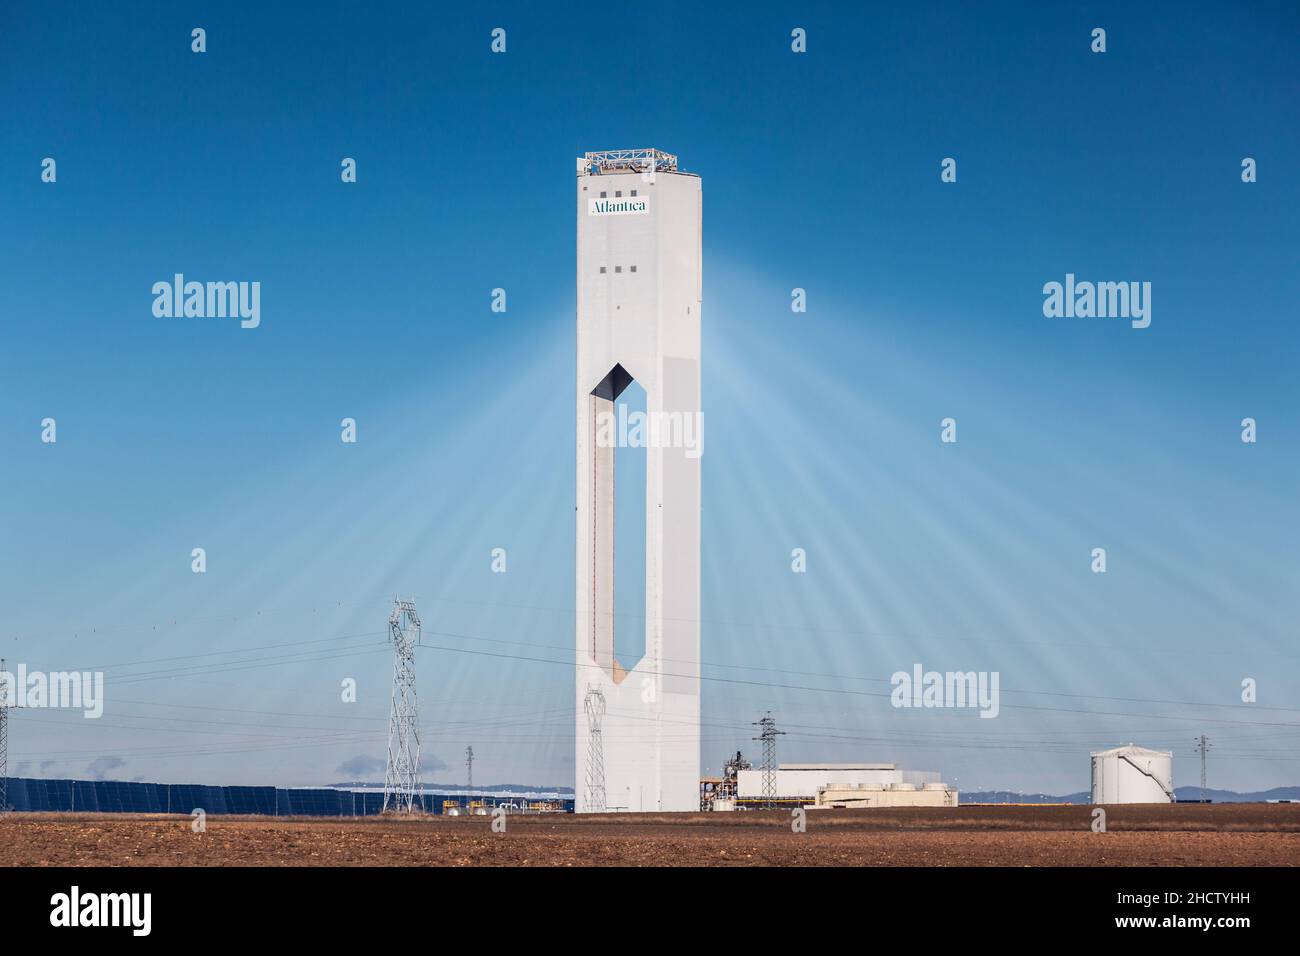 Sanlúcar la mayor, Seville, Spain. December 7, 2021: Solar thermal power plant photovoltaic installation. It was created in 1984 and is still one of t Stock Photo